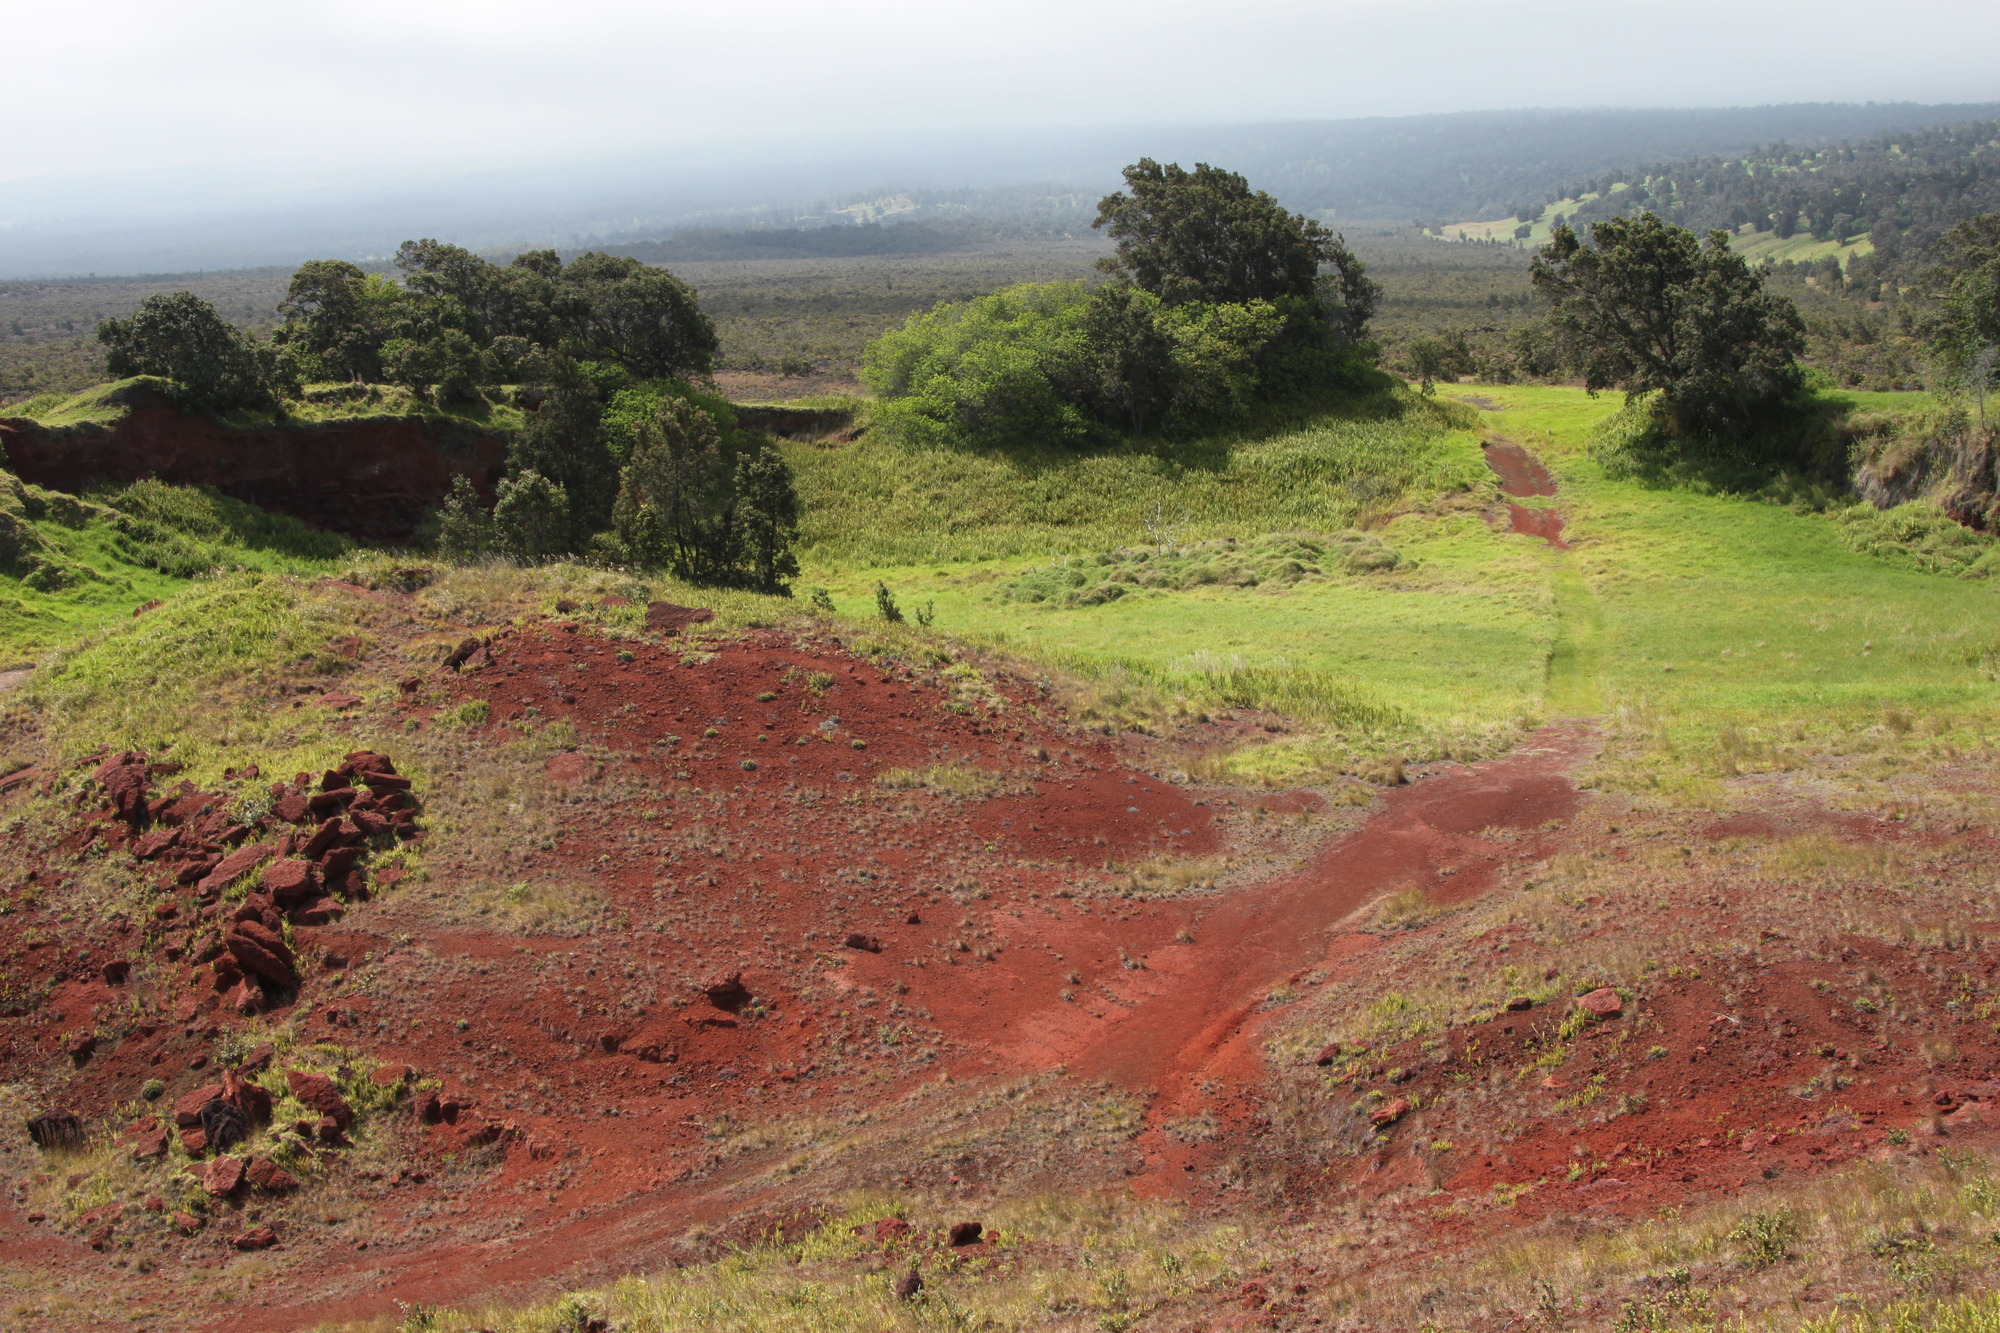 A grassy area with patches of red volcanic soil